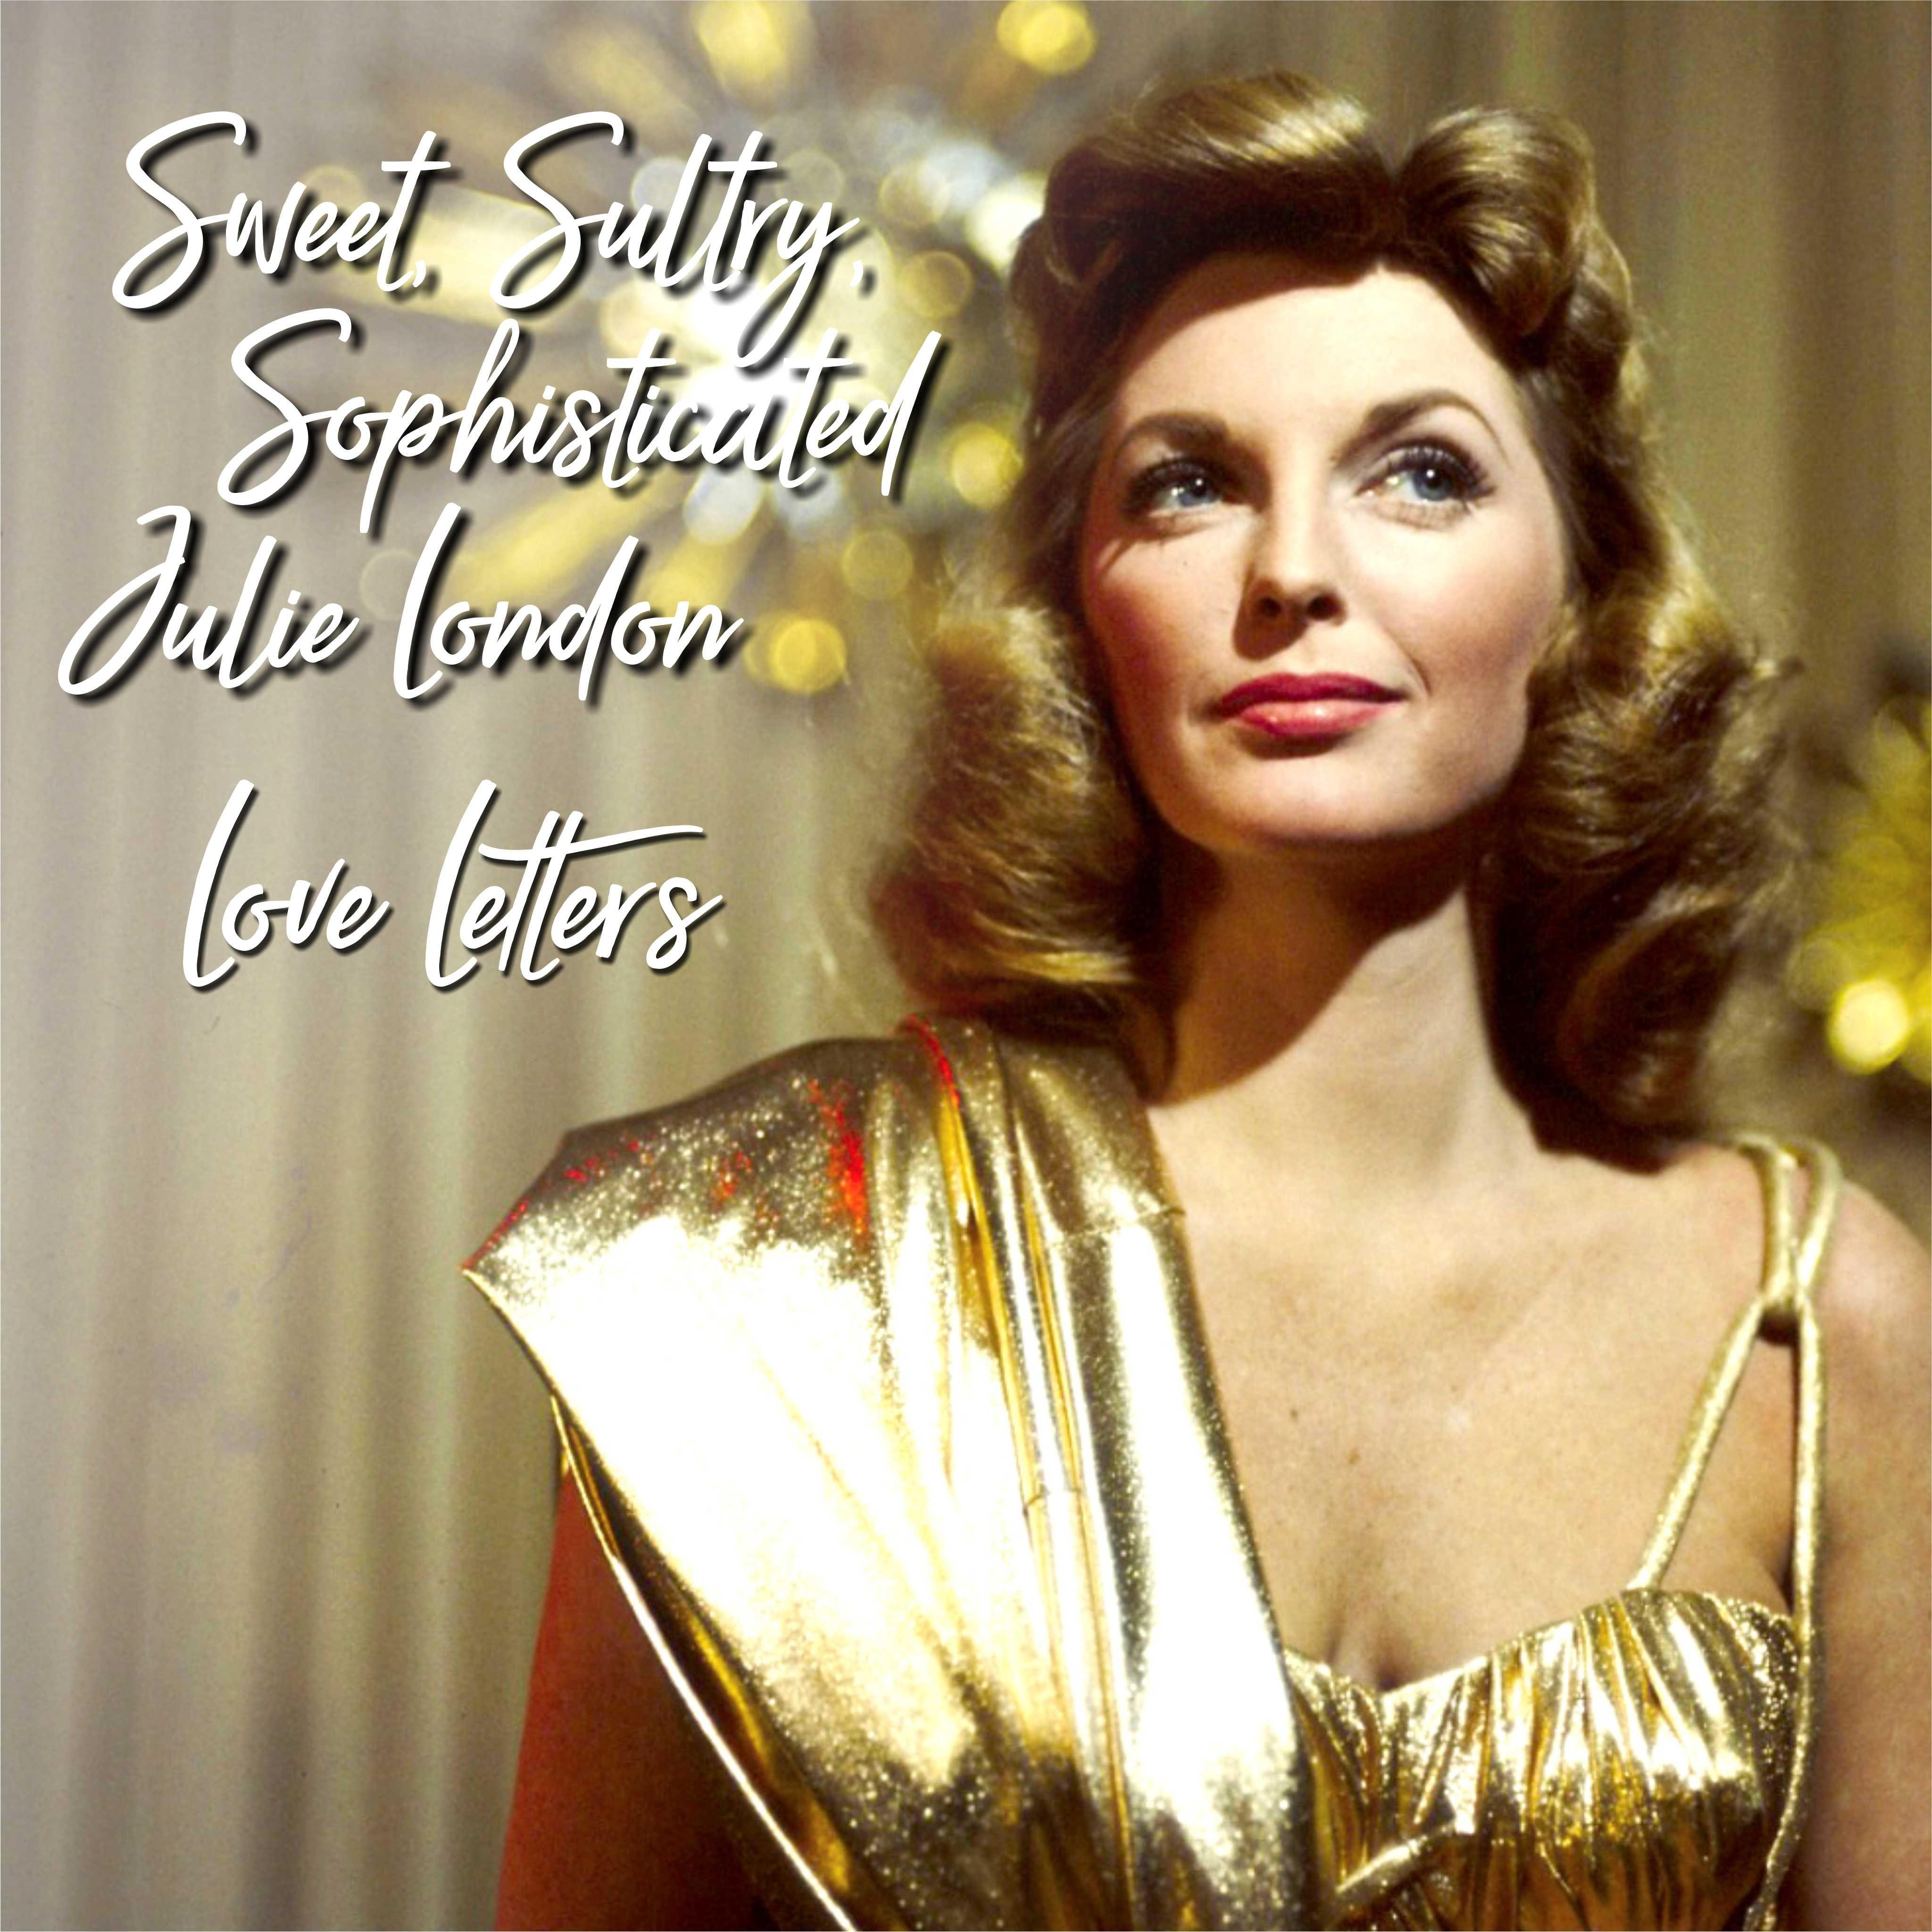 Sweet,Sultry ,Sophisticated Julie London:: Love Letters